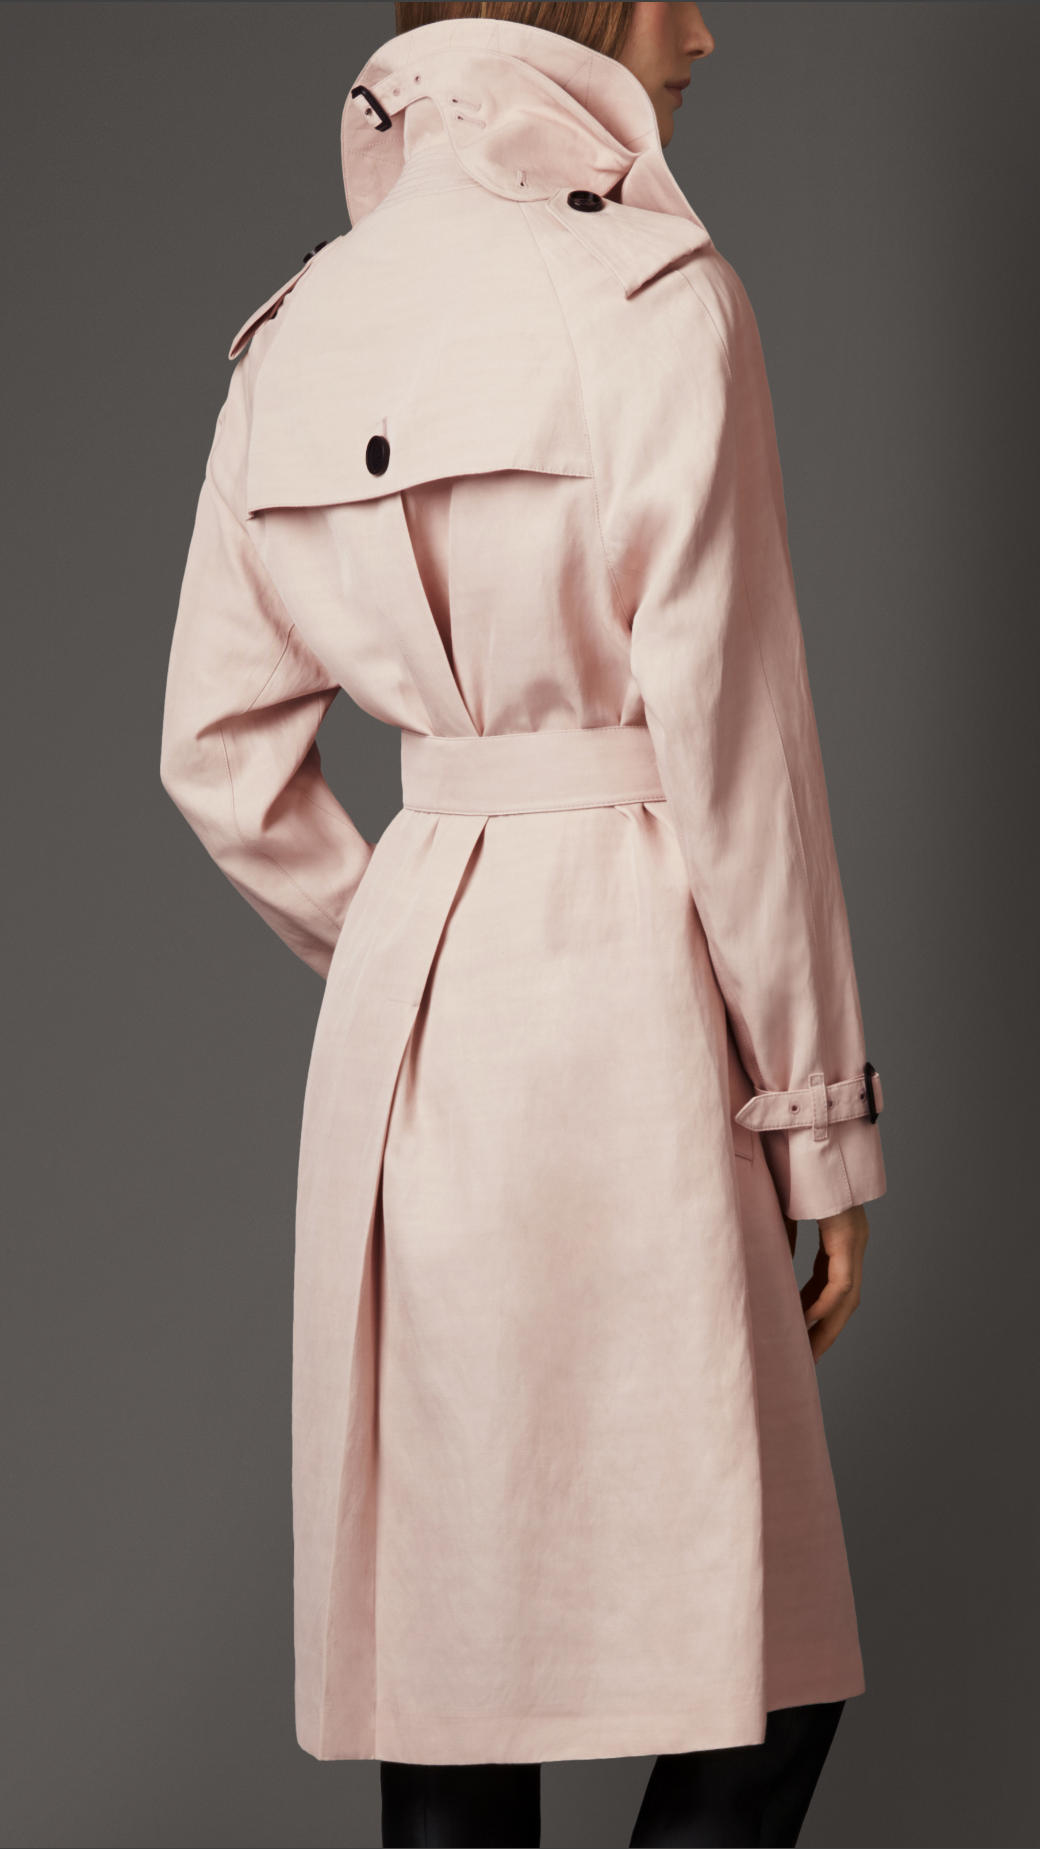 Lyst - Burberry Showerproof Cotton Blend Trench Coat in Pink